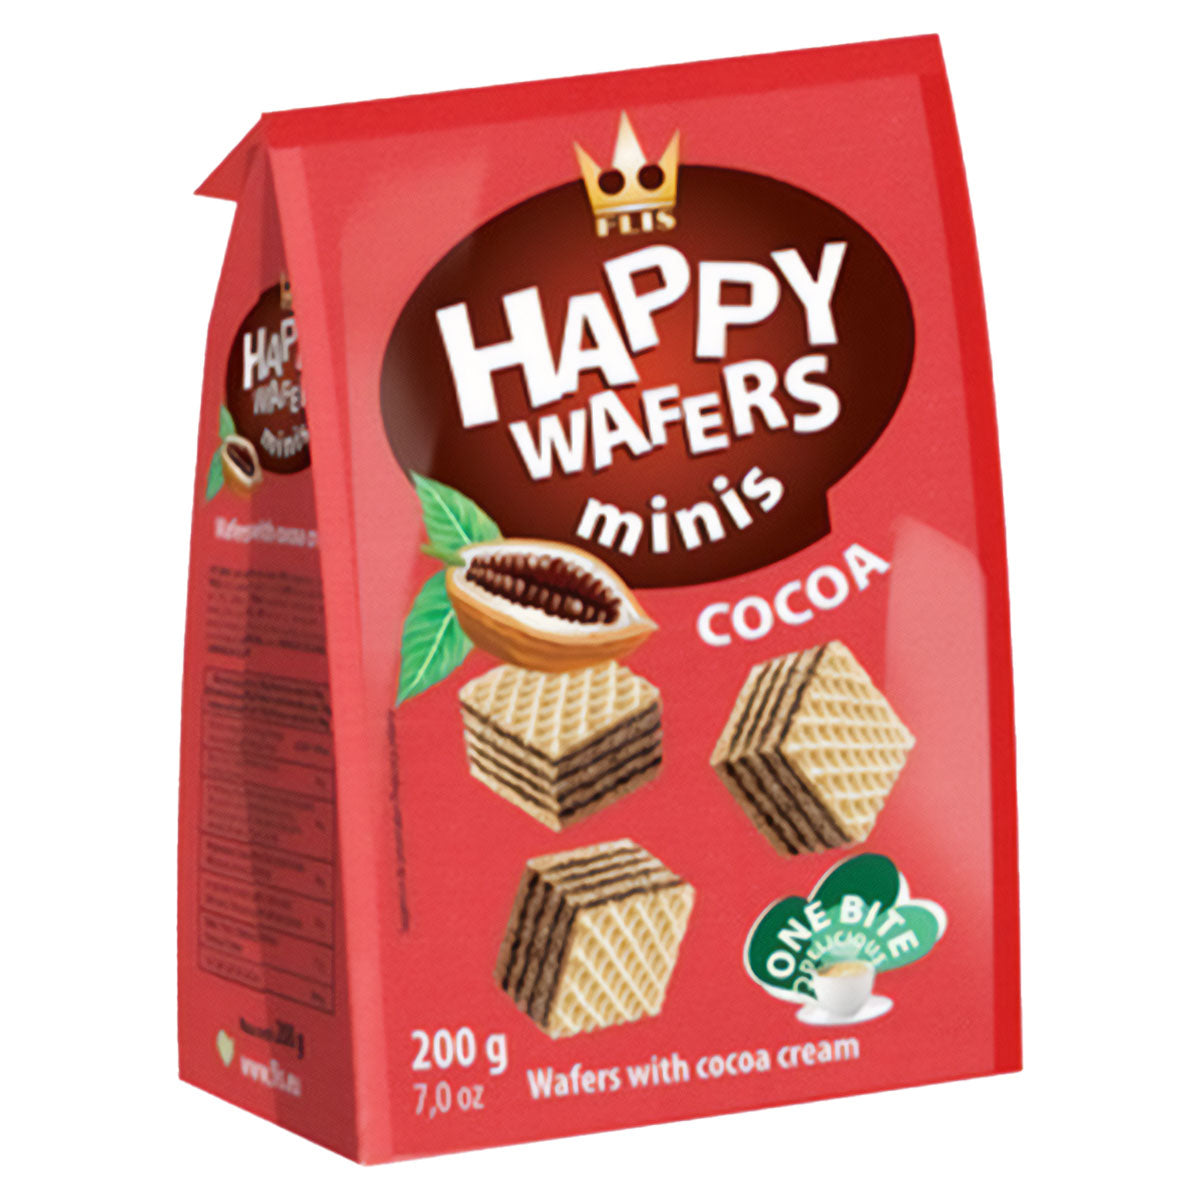 Flis - Happy Wafers Stuffed with Cocoa - 200g - Continental Food Store